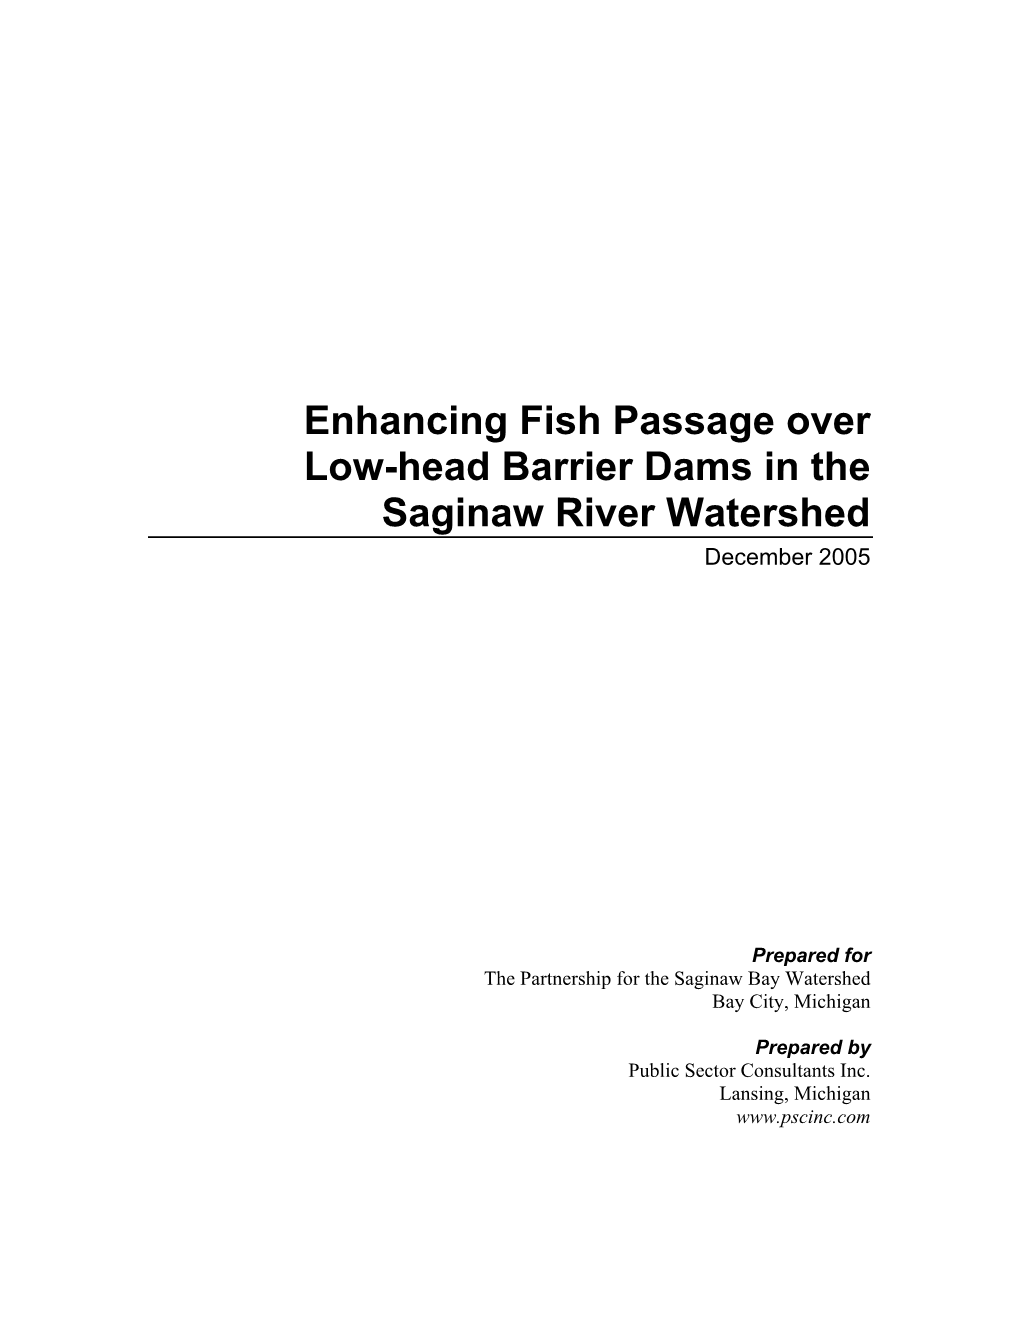 Enhancing Fish Passage Over Low-Head Barrier Dams in the Saginaw River Watershed December 2005